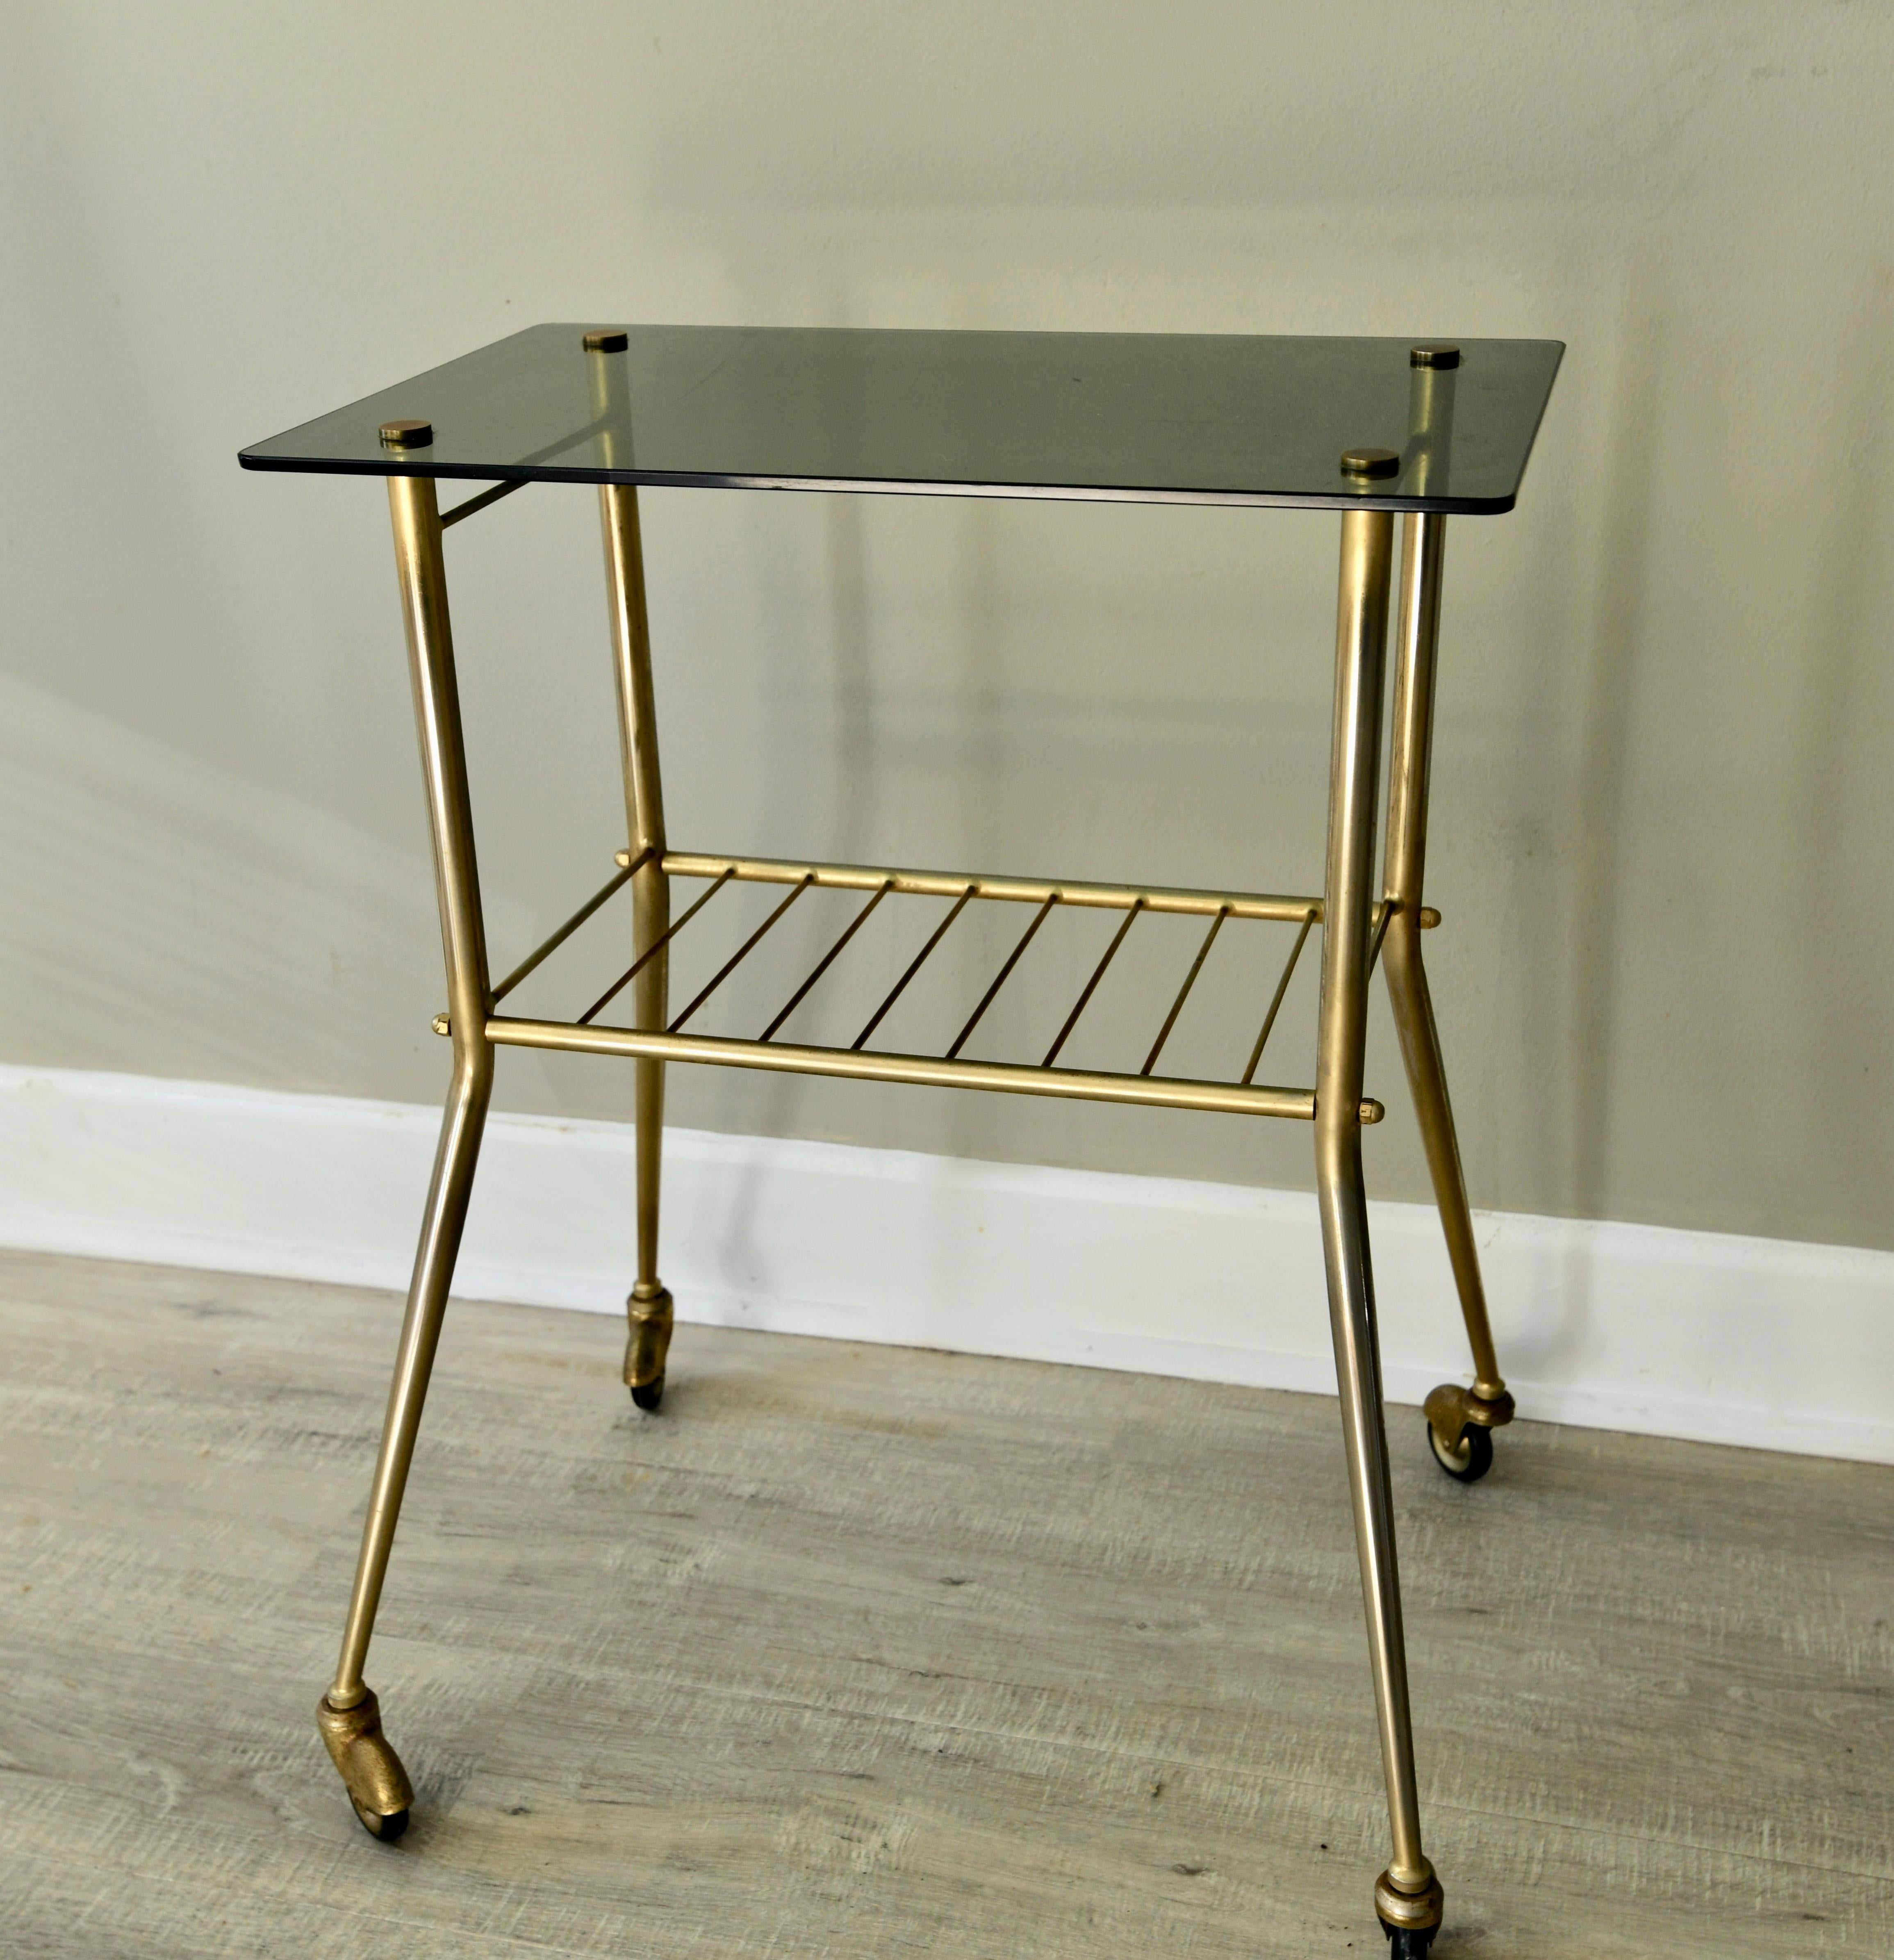 French Provincial French Smoked Glass Brass Drinks Trolley Midcentury, 1950s For Sale